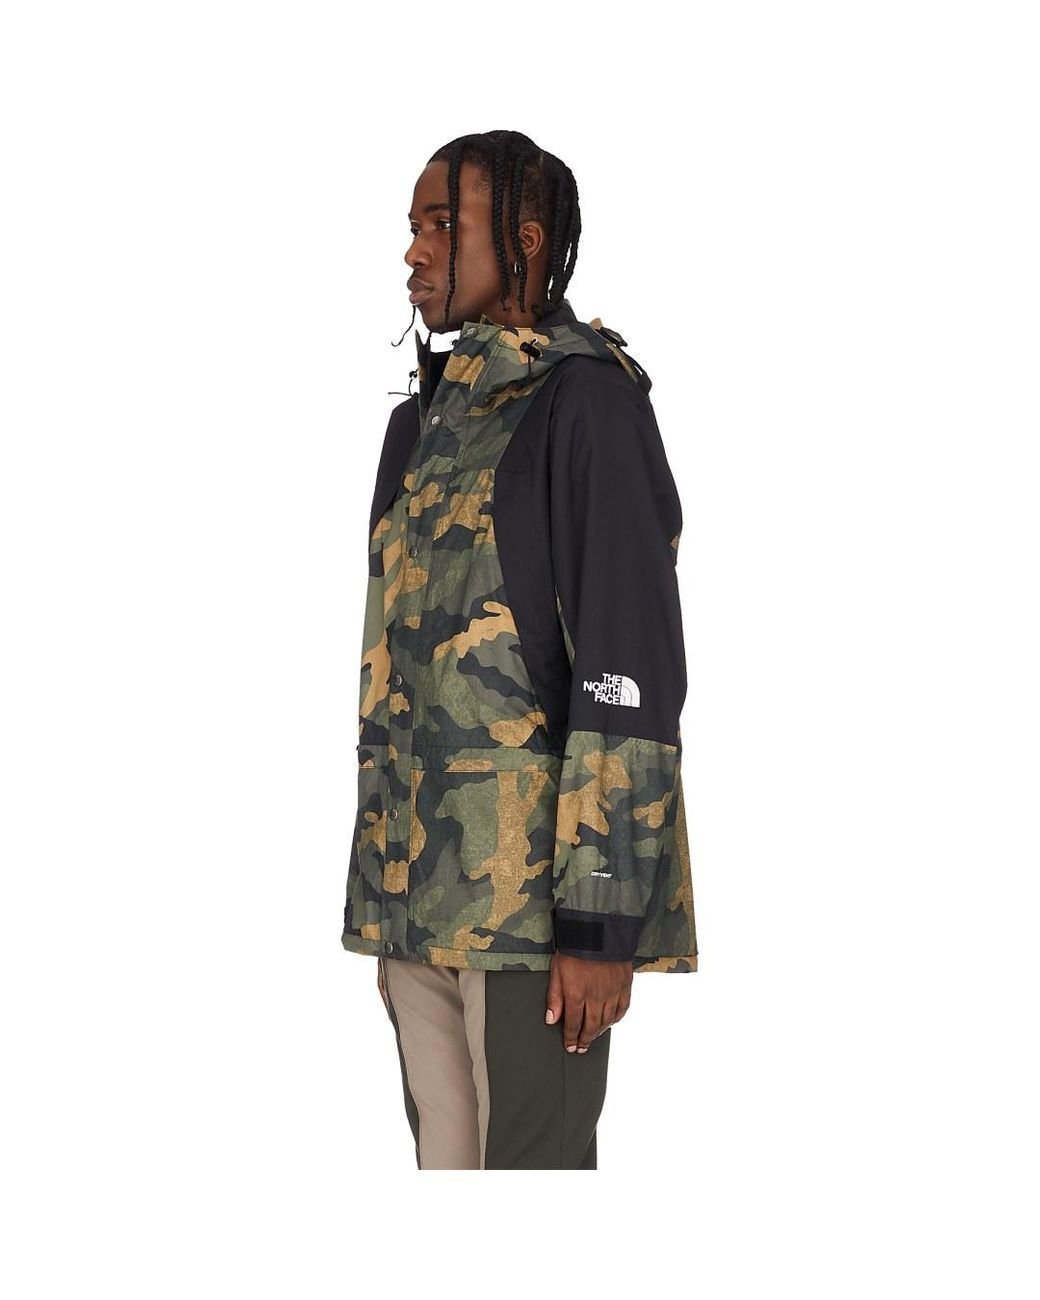 The North Face 1994 Retro Mountain Light Jacket in Burnt Olive Green Camo  (Green) for Men - Save 30% | Lyst